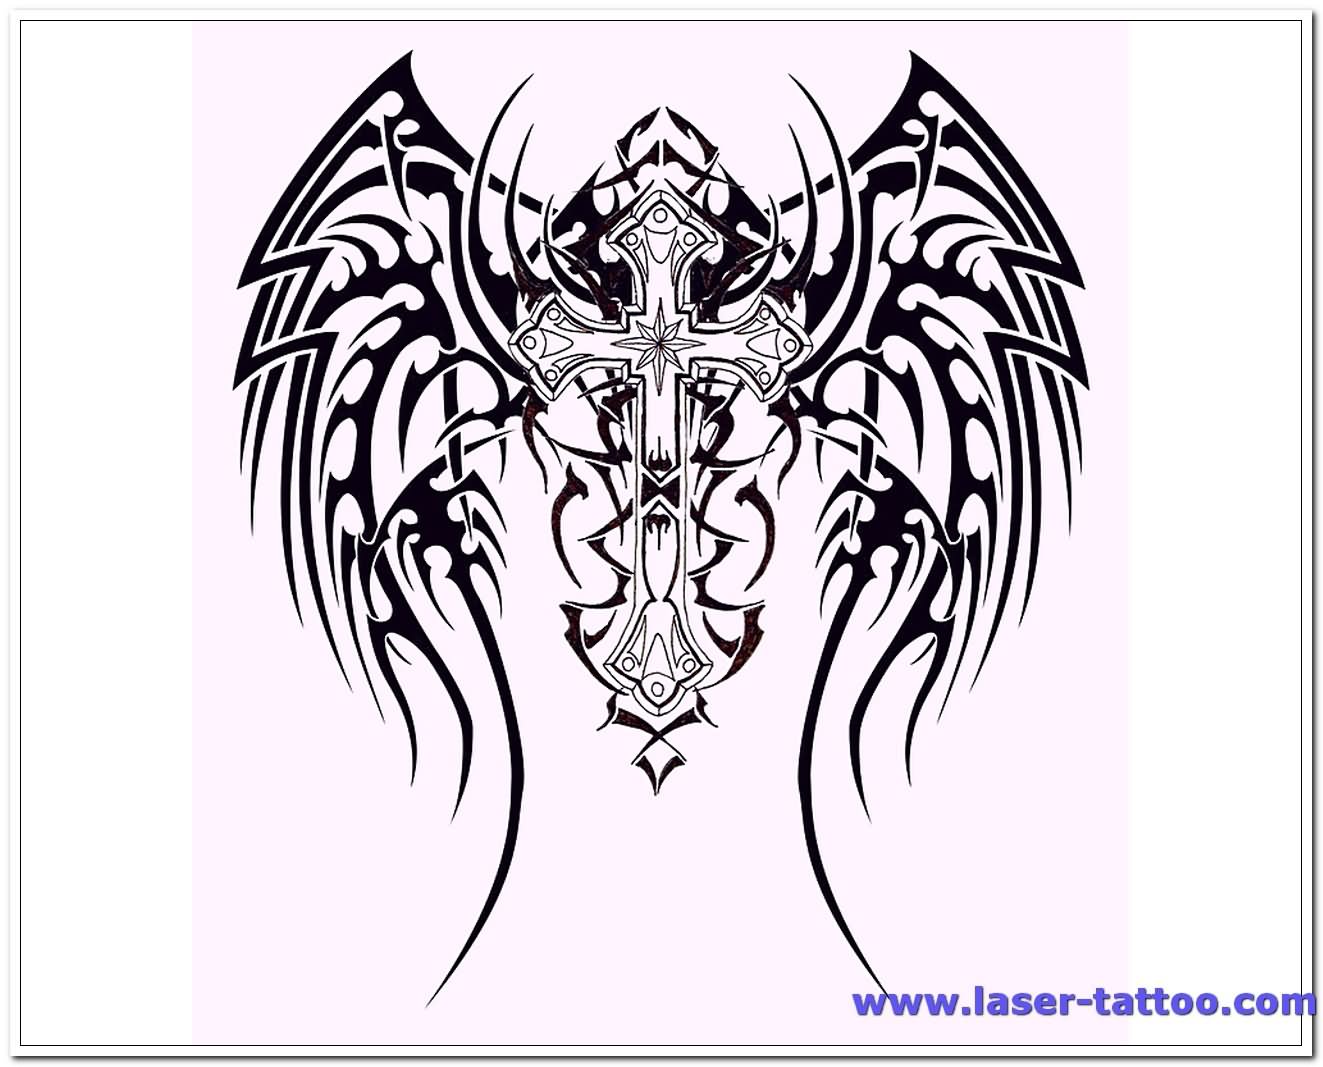 Gothic Cross With Tribal Wings Tattoo Design